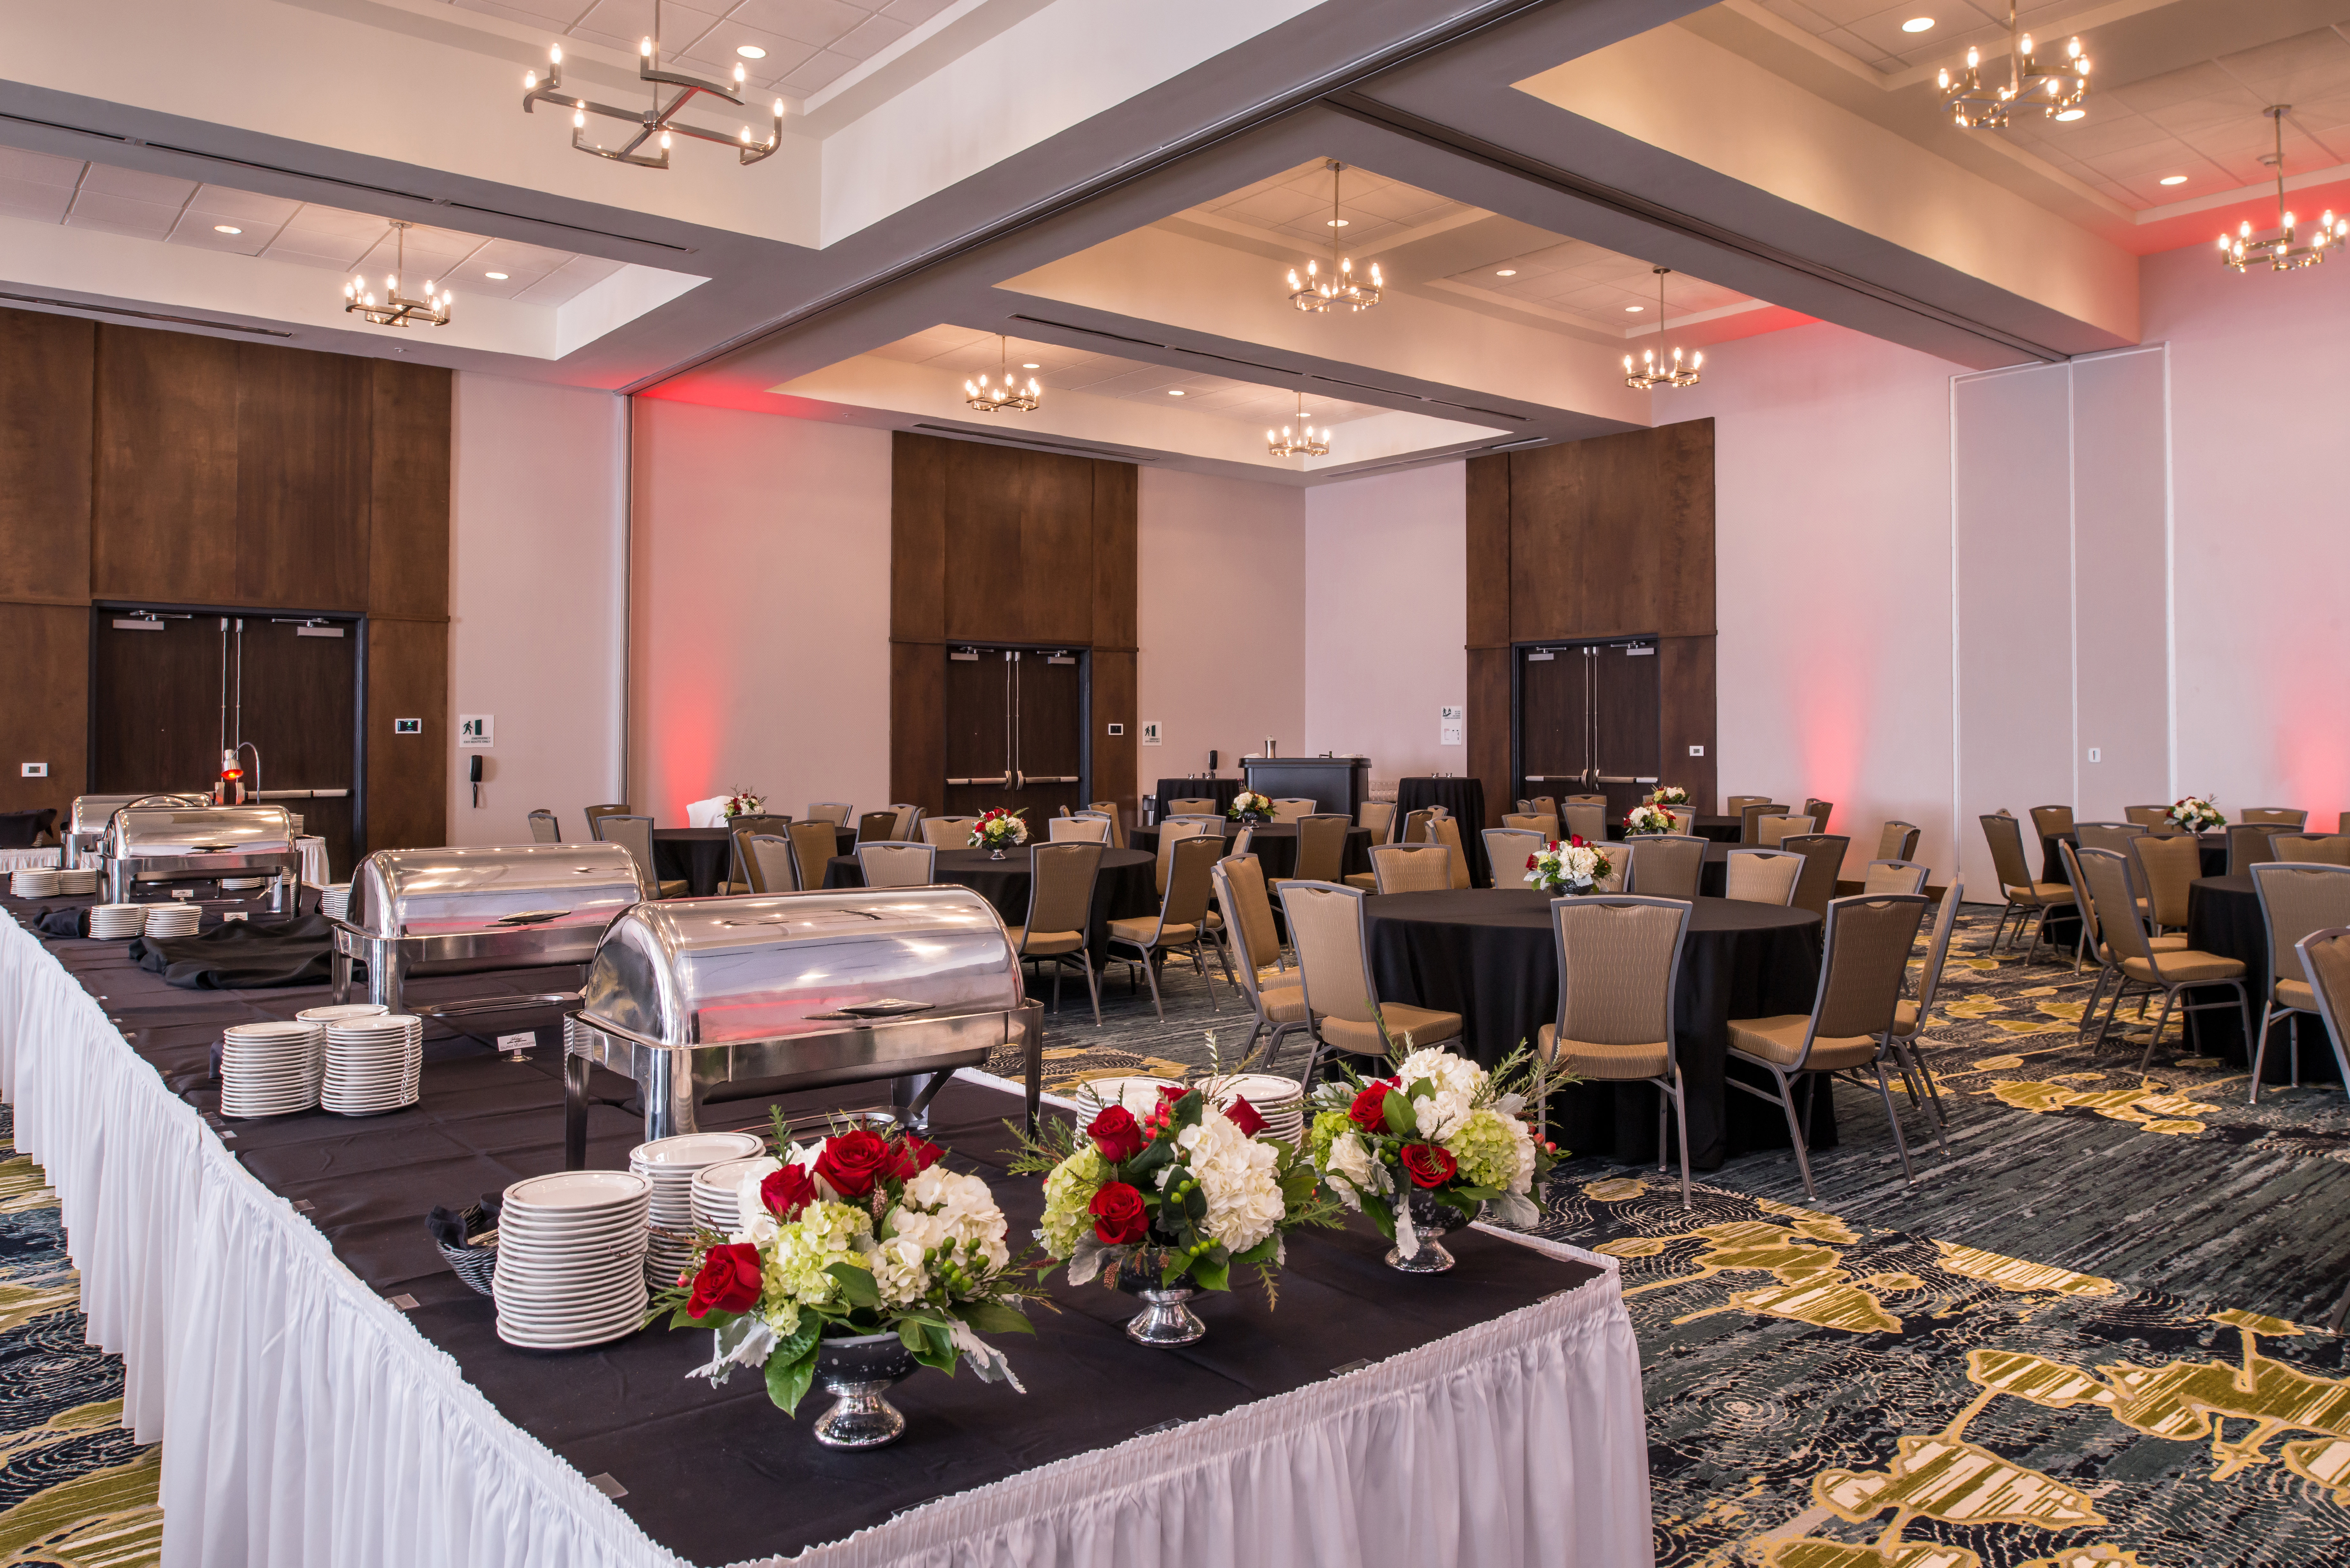 Our venues can handle up to 350 guests.